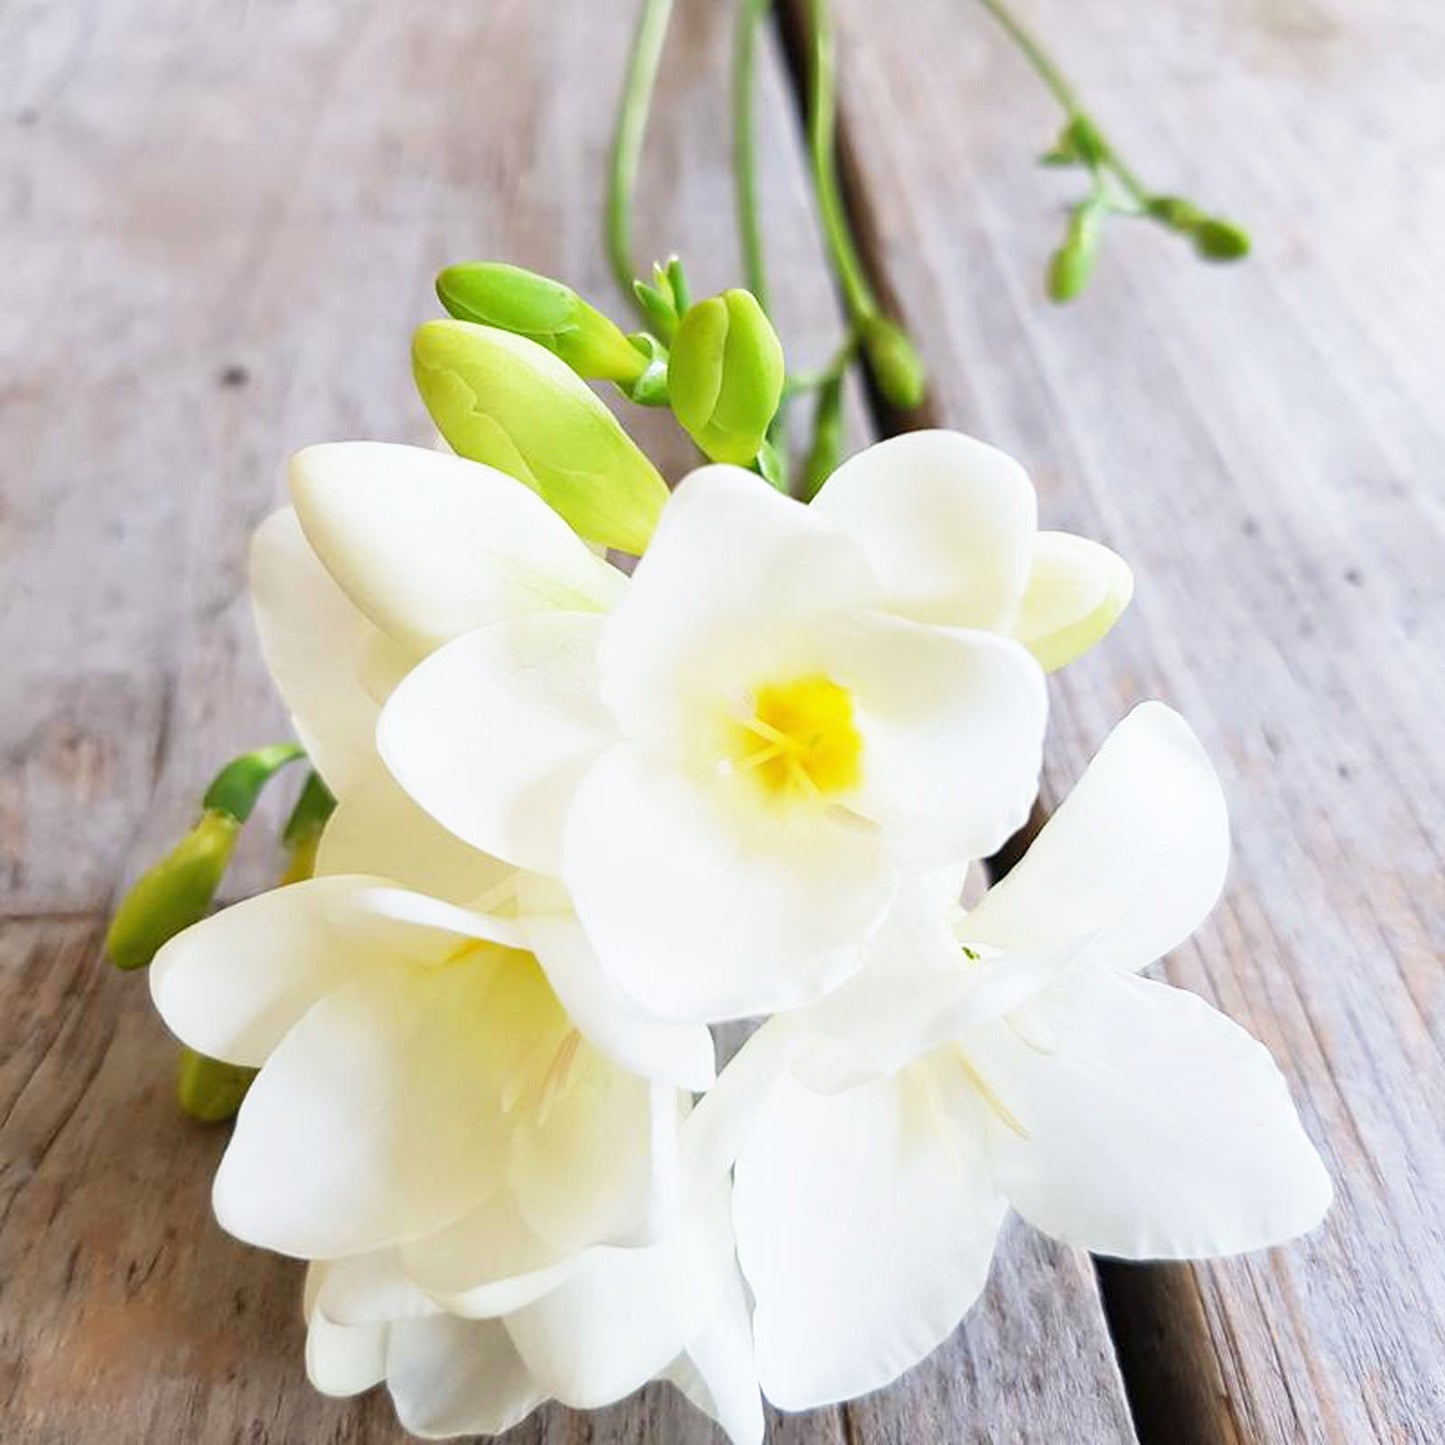 Jasmine and Freesia Fragrance Oil | Truly Personal | Candles, Wax Melts, Soap, Bath Bombs